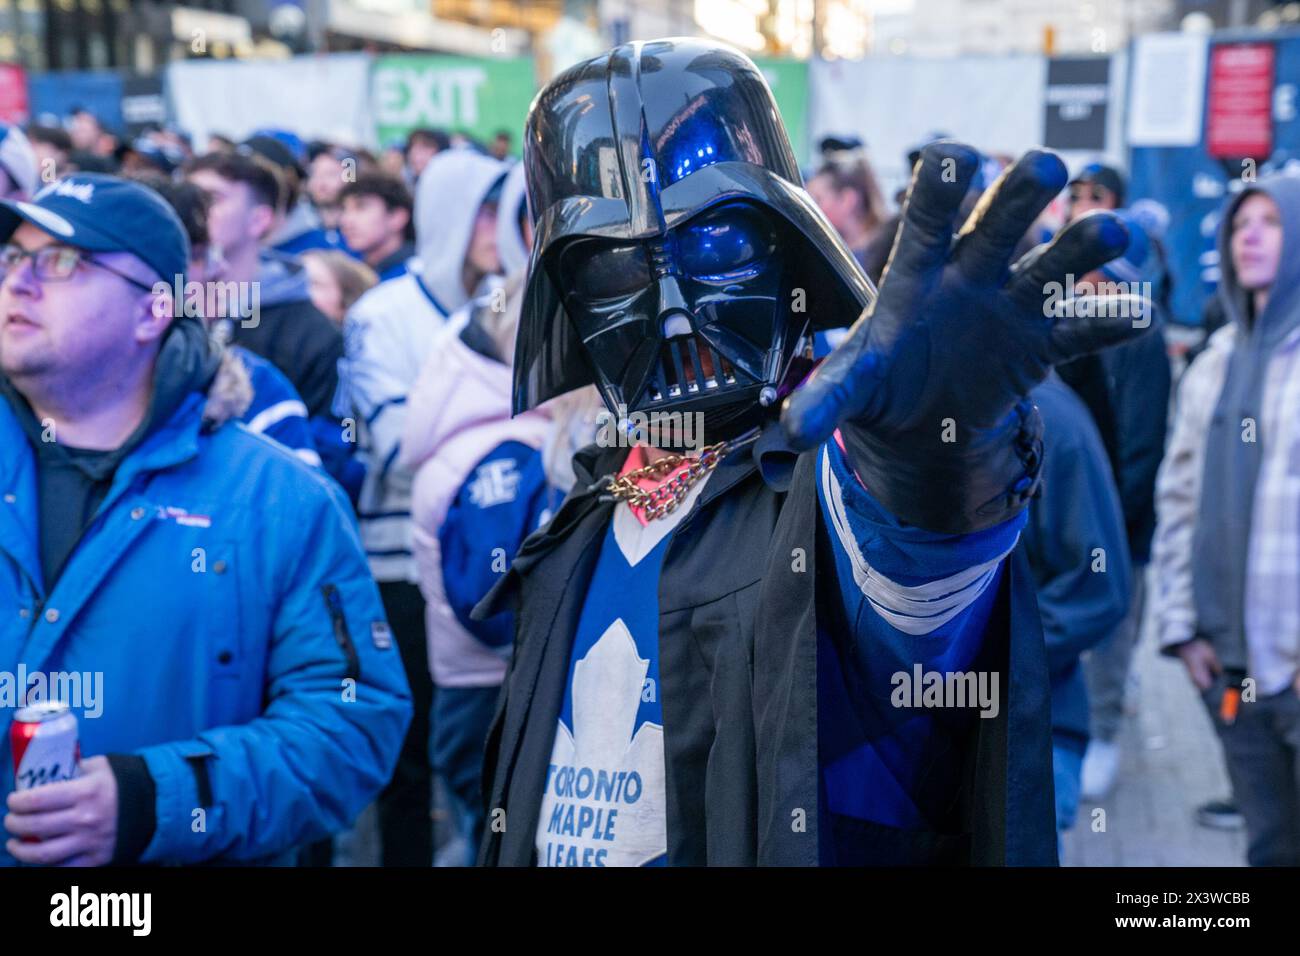 Fan dressed as Darth Vader at Maple Leaf Square outside Scotibank Arena, watching Round 1, Game 4 playoff game of Toronto Maple Leafs vs Boston Bruins playoff game on a giant screen. During Toronto Maple Leafs playoff games, Maple Leaf Square transforms into a sea of blue and white, echoing with the chants of passionate fans eagerly rallying behind their team's quest for victory. The electric atmosphere radiates anticipation and excitement, creating unforgettable memories for both die-hard supporters and casual observers alike. (Photo by Shawn Goldberg/SOPA Images/Sipa USA) Stock Photo